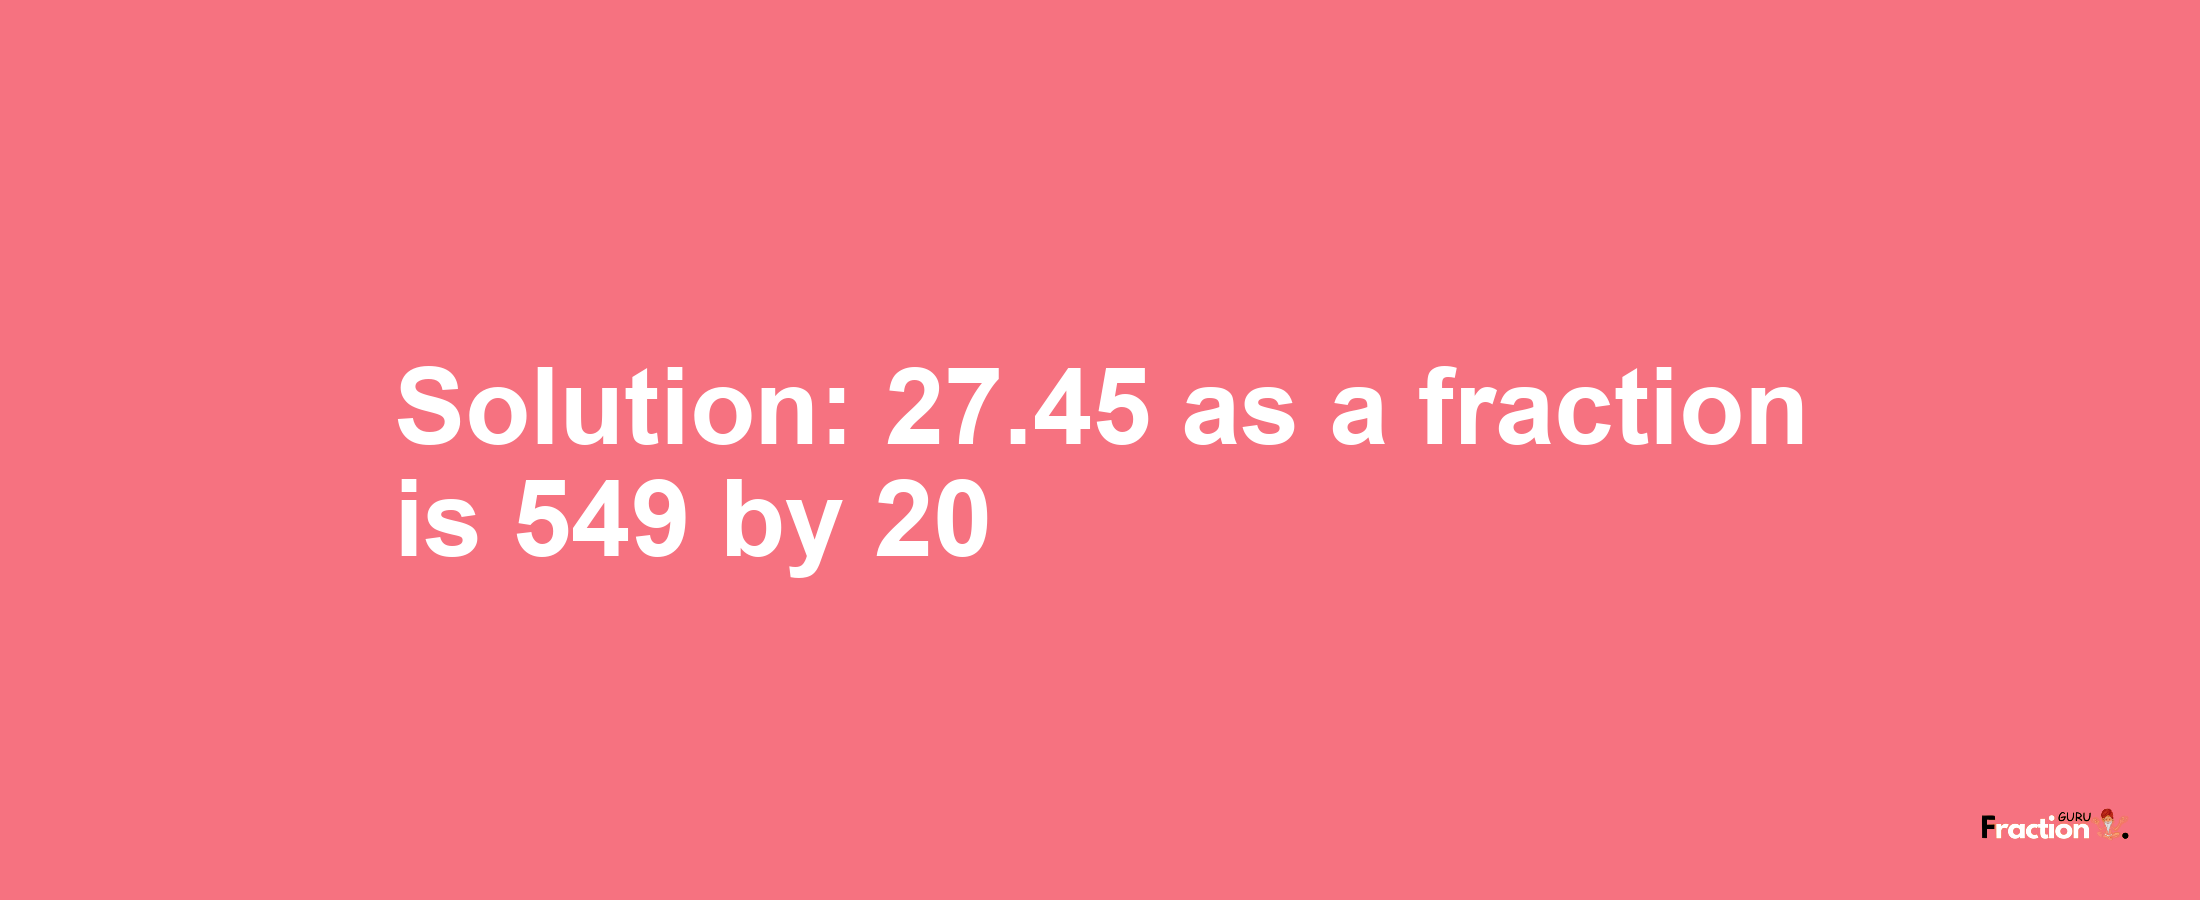 Solution:27.45 as a fraction is 549/20